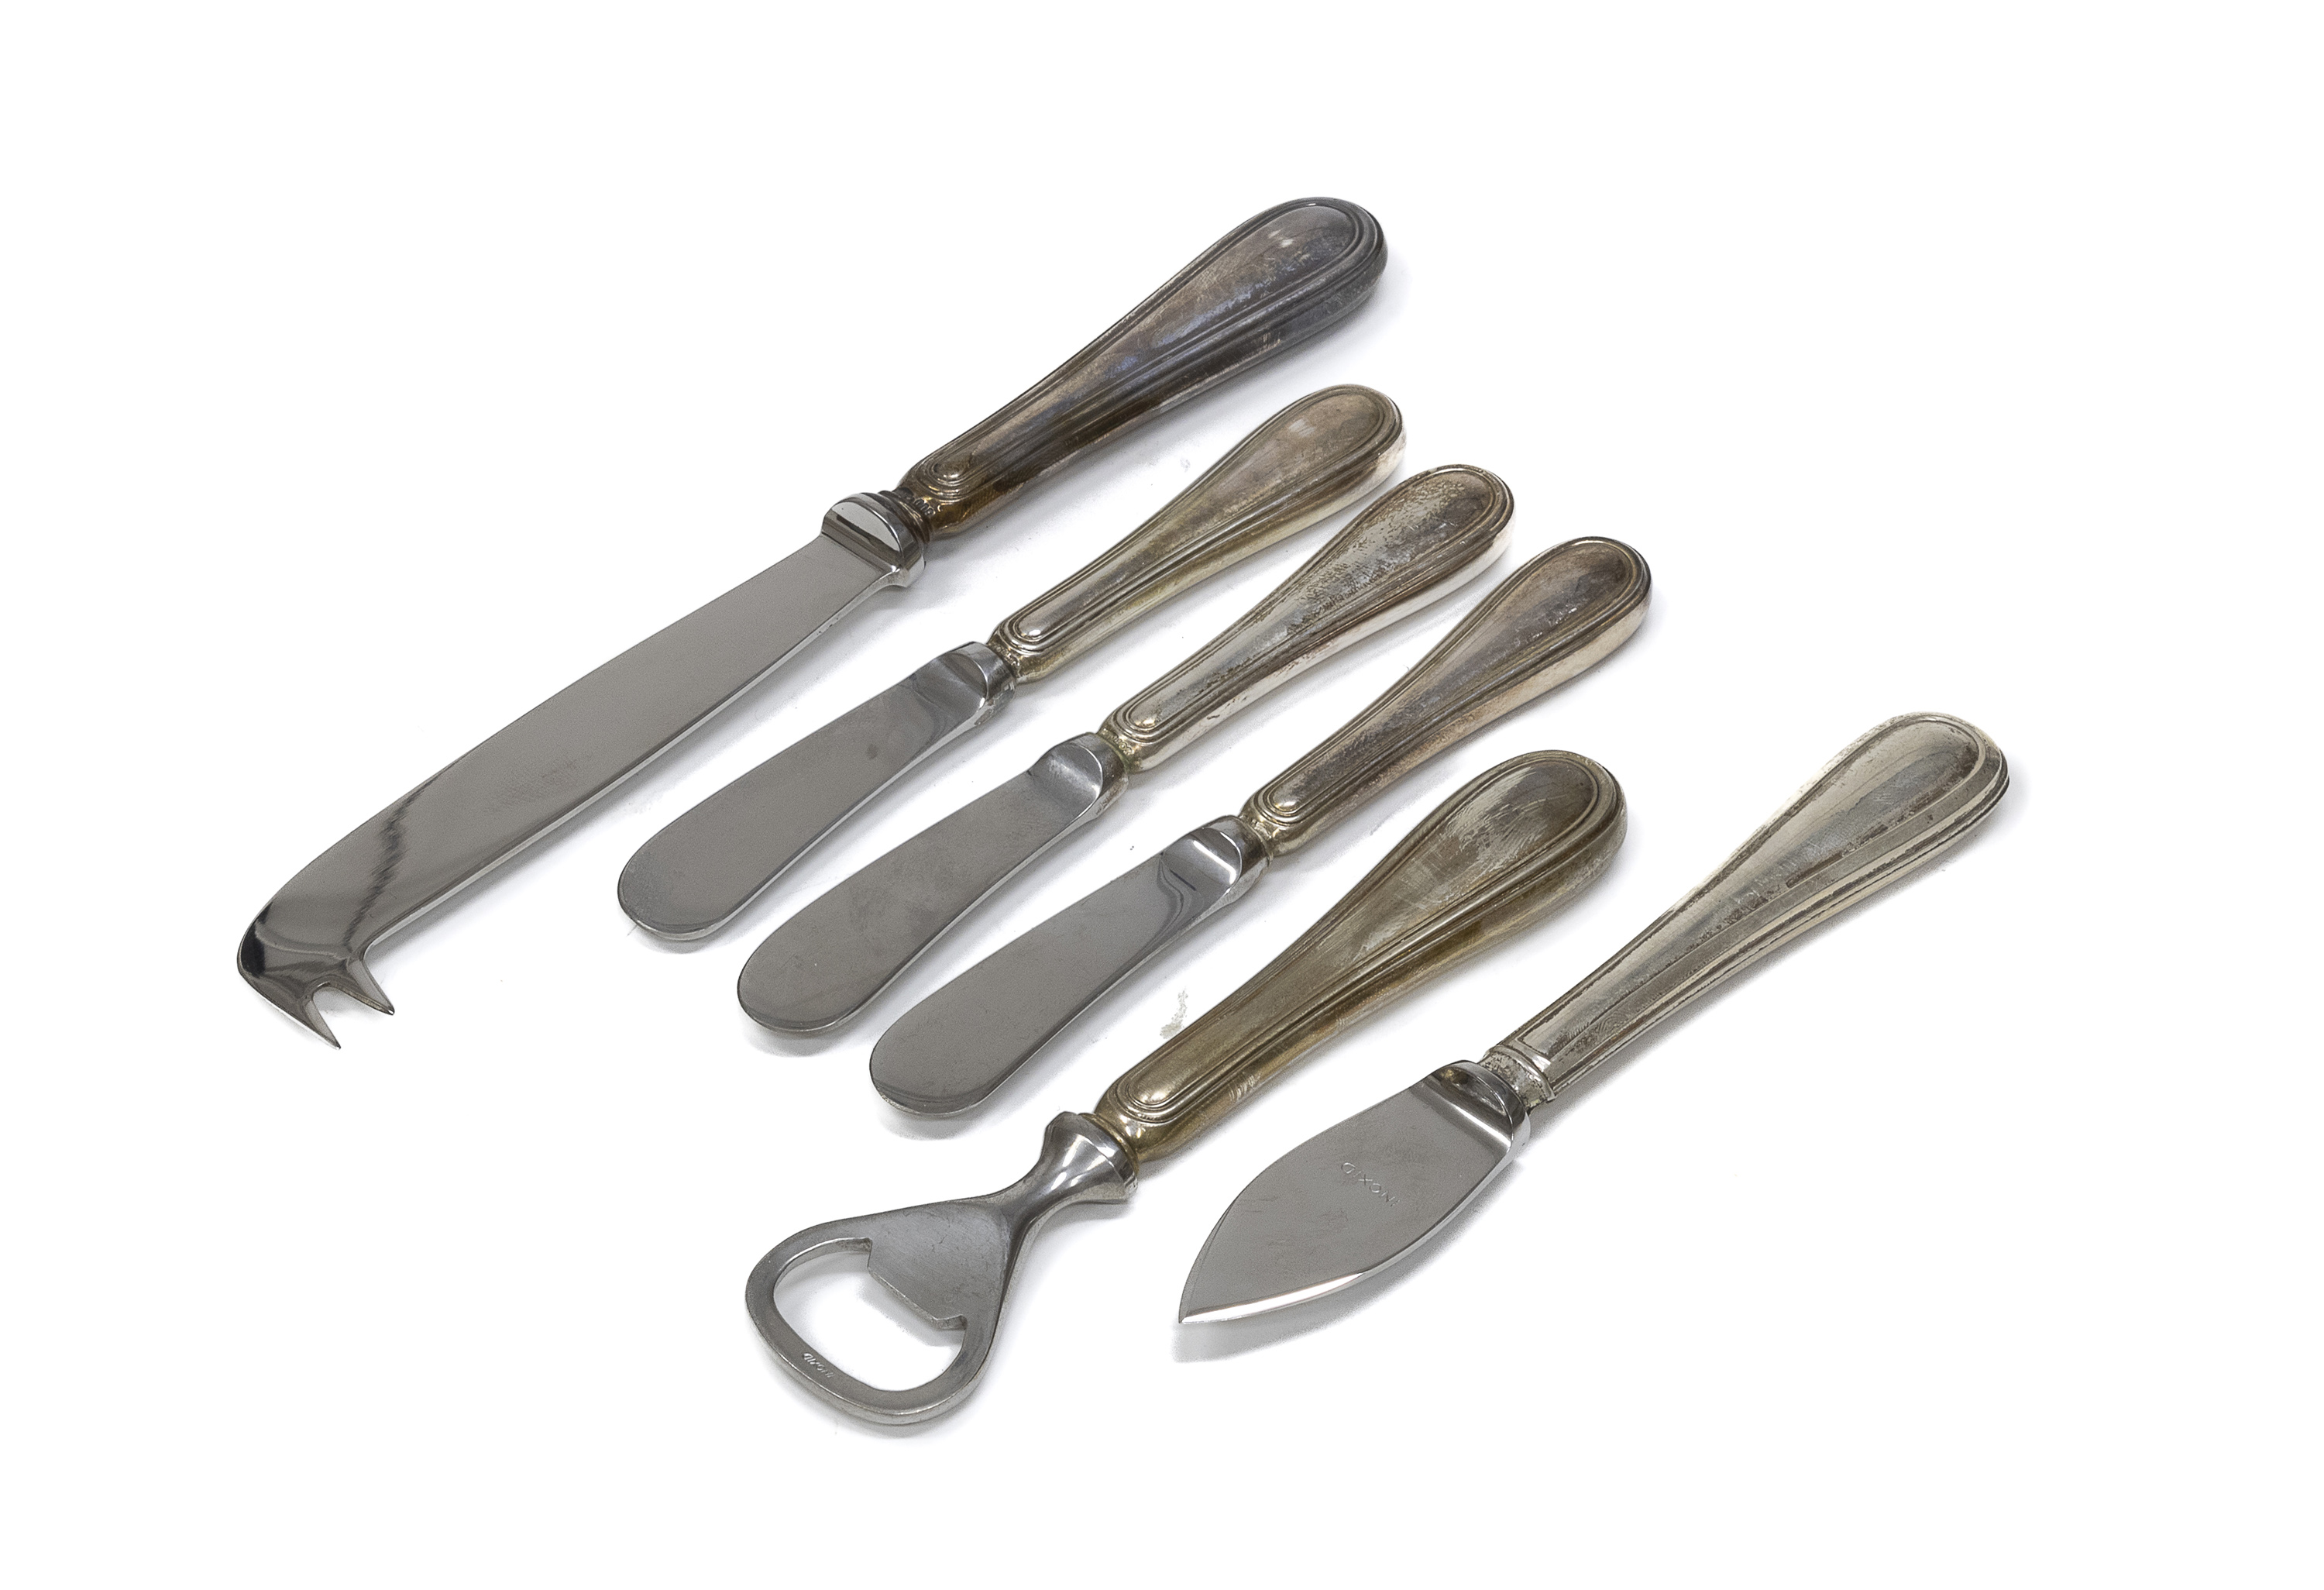 SIX MISCELLANEOUS SILVER TABLEWARE CUTLERY 20TH CENTURY ITALY